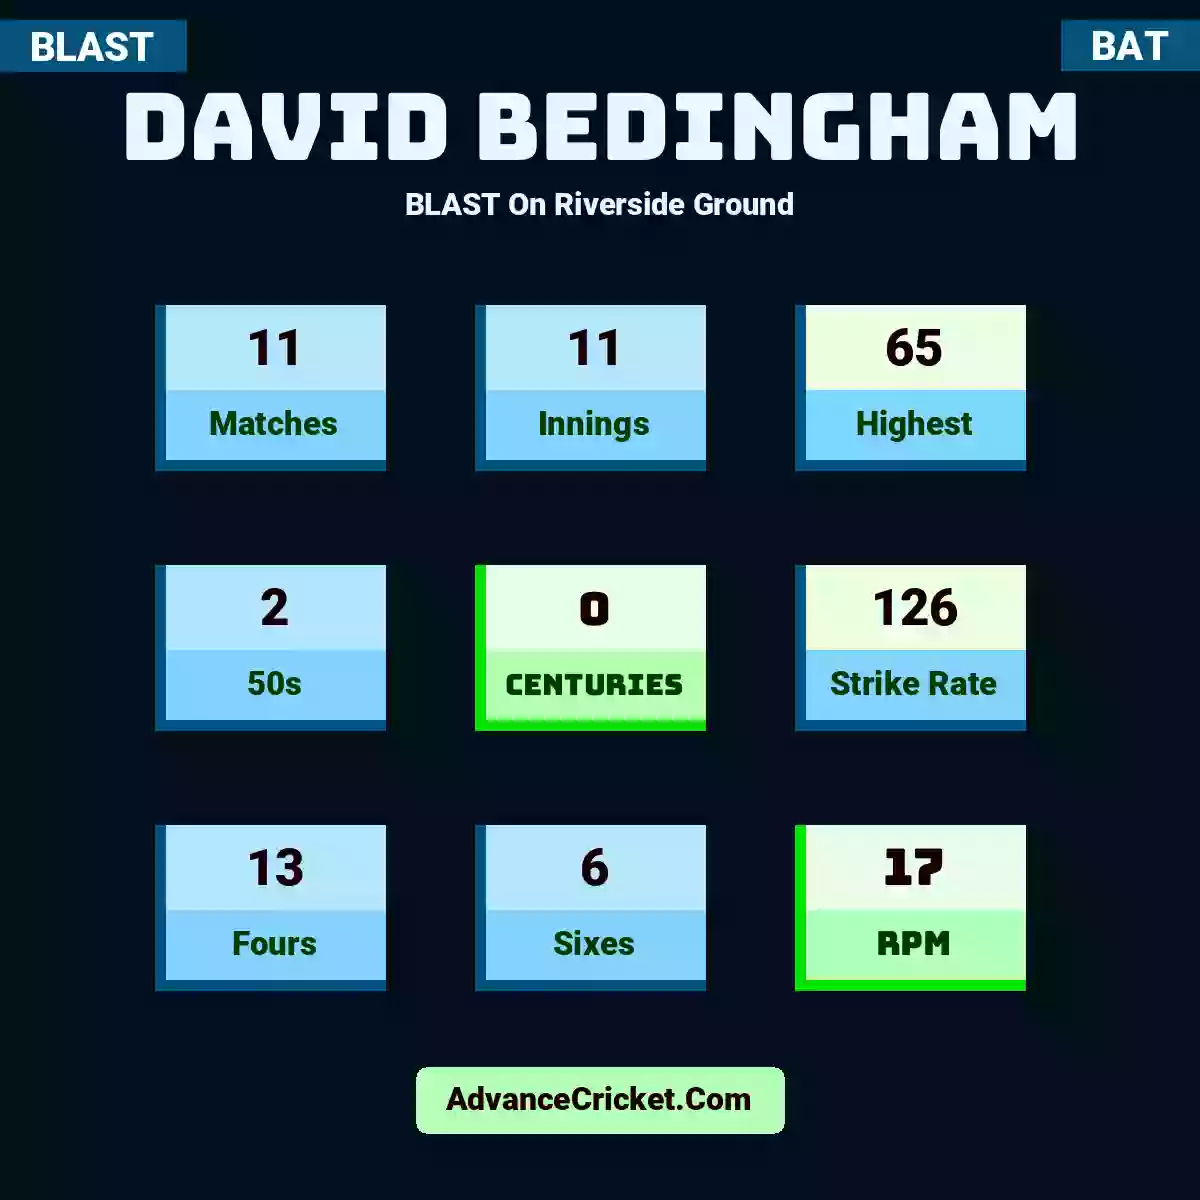 David Bedingham BLAST  On Riverside Ground, David Bedingham played 11 matches, scored 65 runs as highest, 2 half-centuries, and 0 centuries, with a strike rate of 126. D.Bedingham hit 13 fours and 6 sixes, with an RPM of 17.